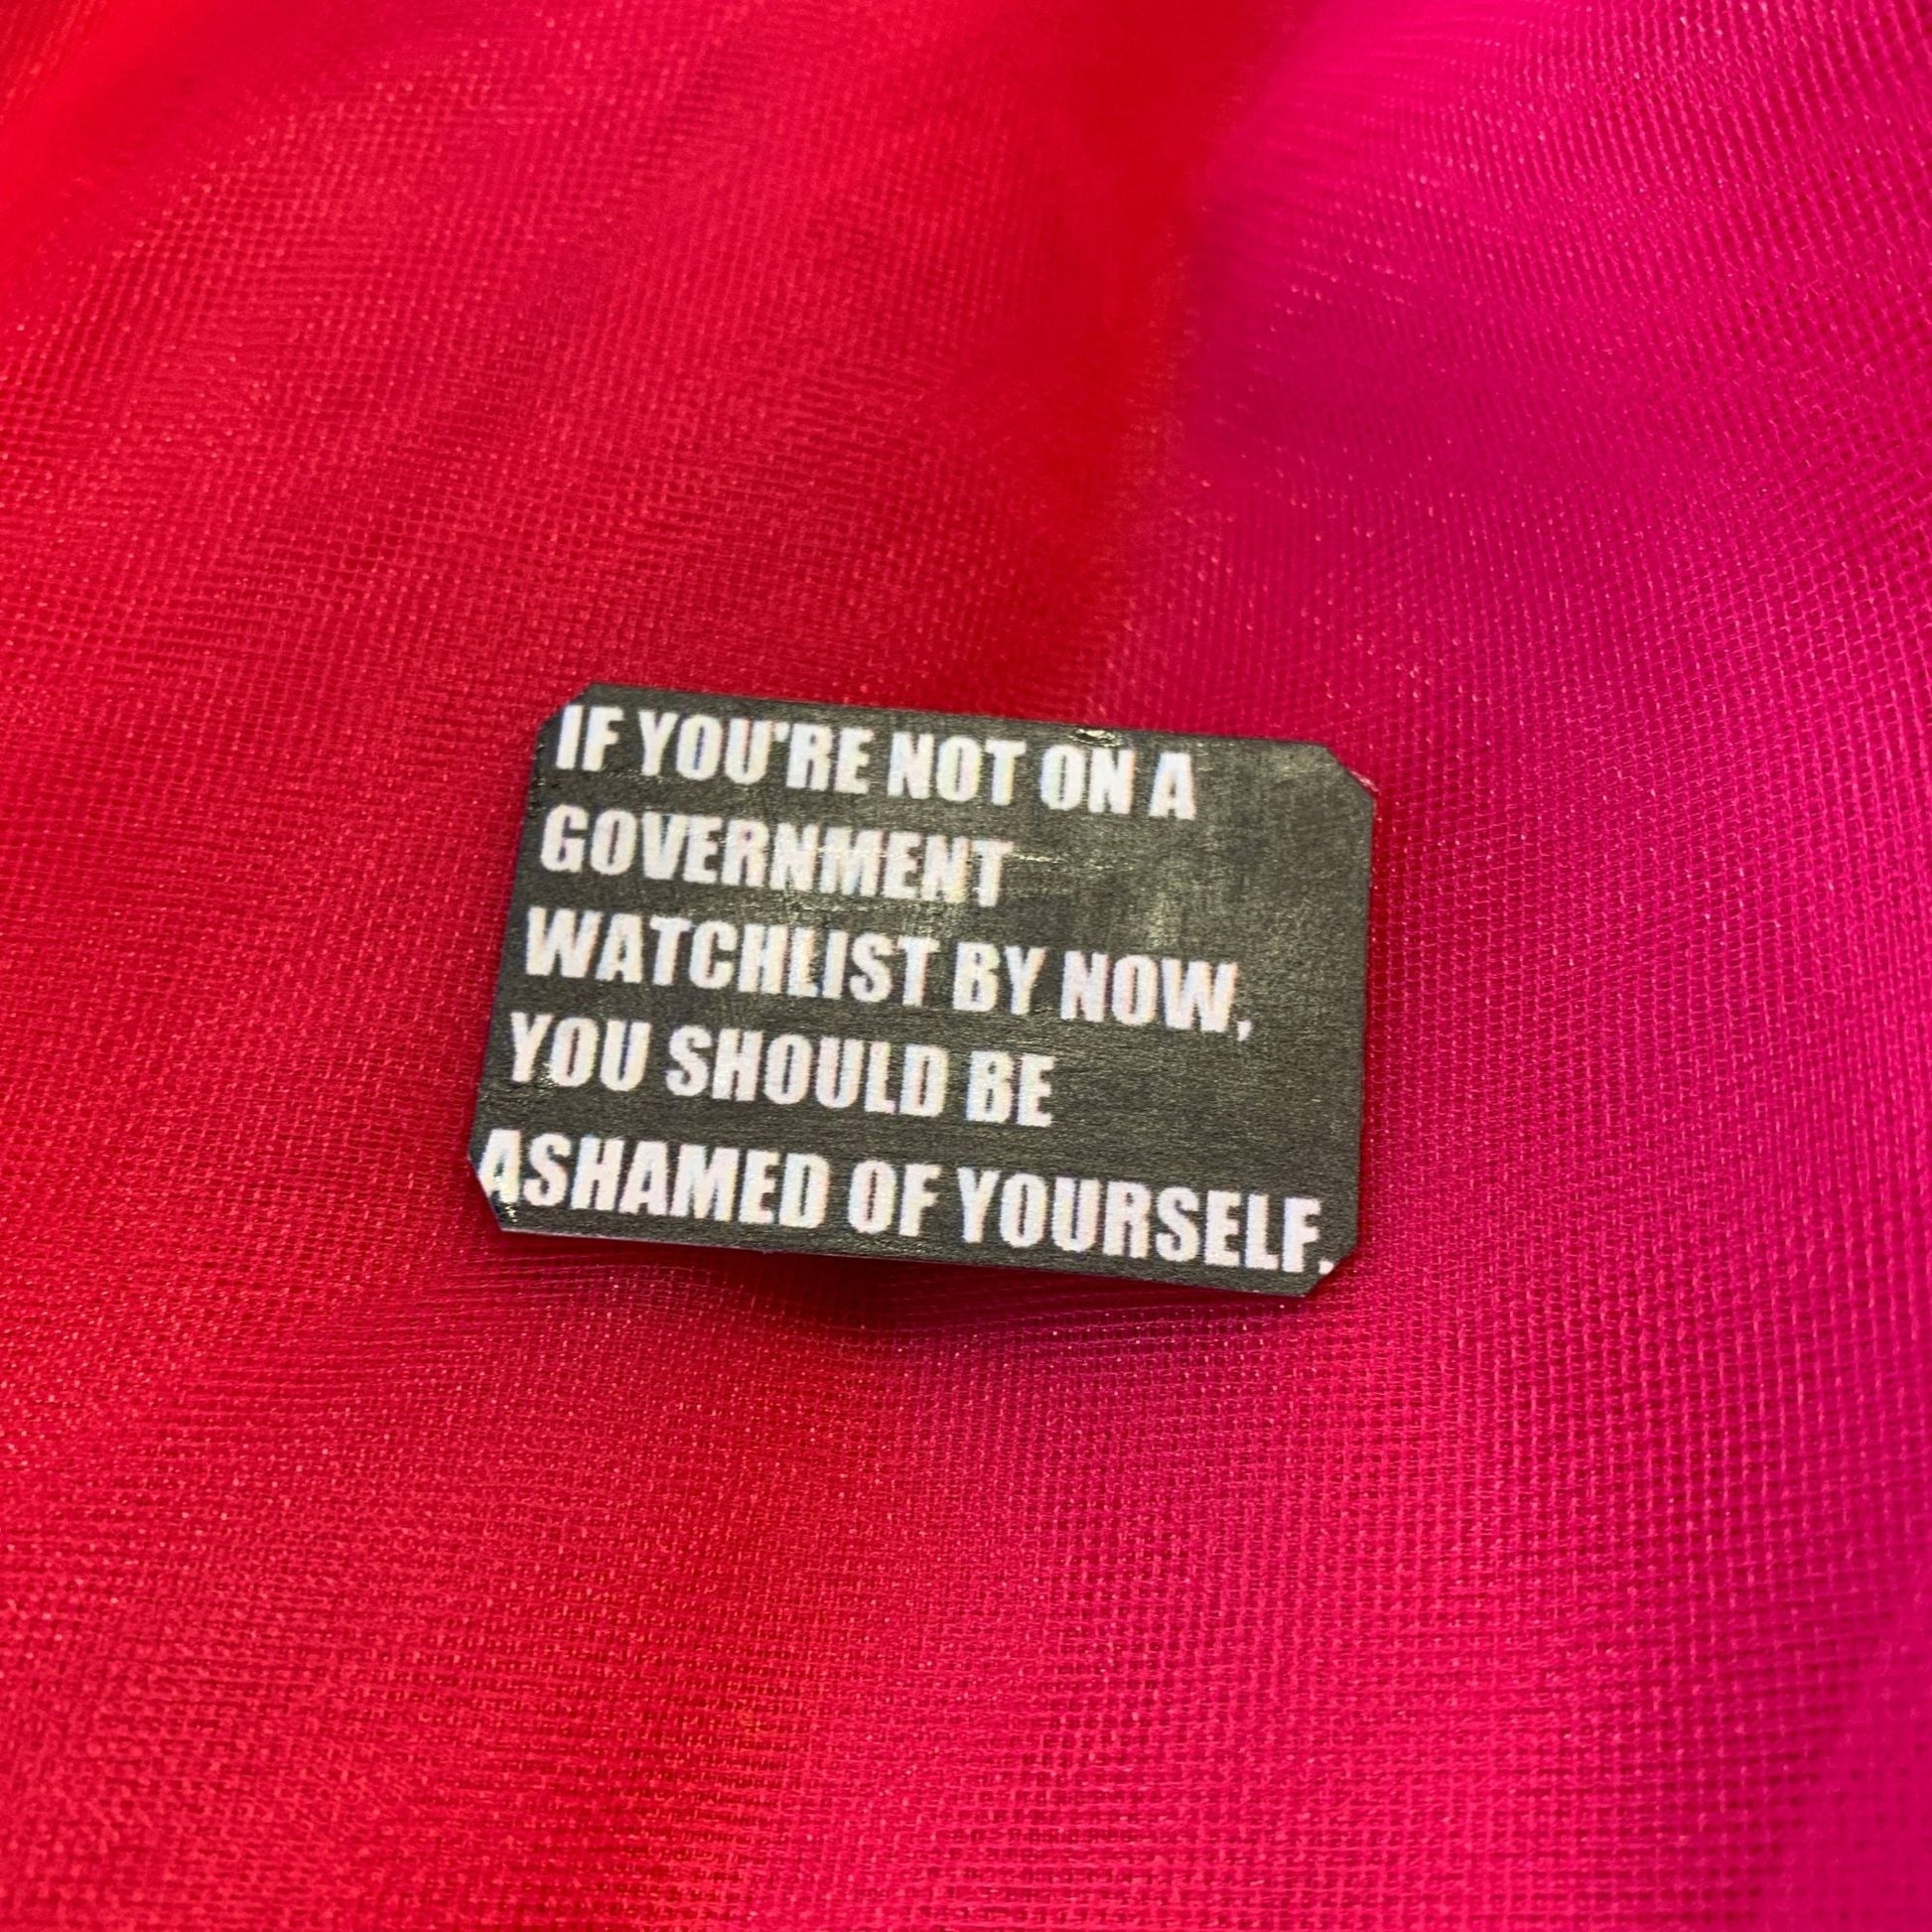 If You're Not on a Government Watchlist by Now Handmade Tin Pin in Black and White